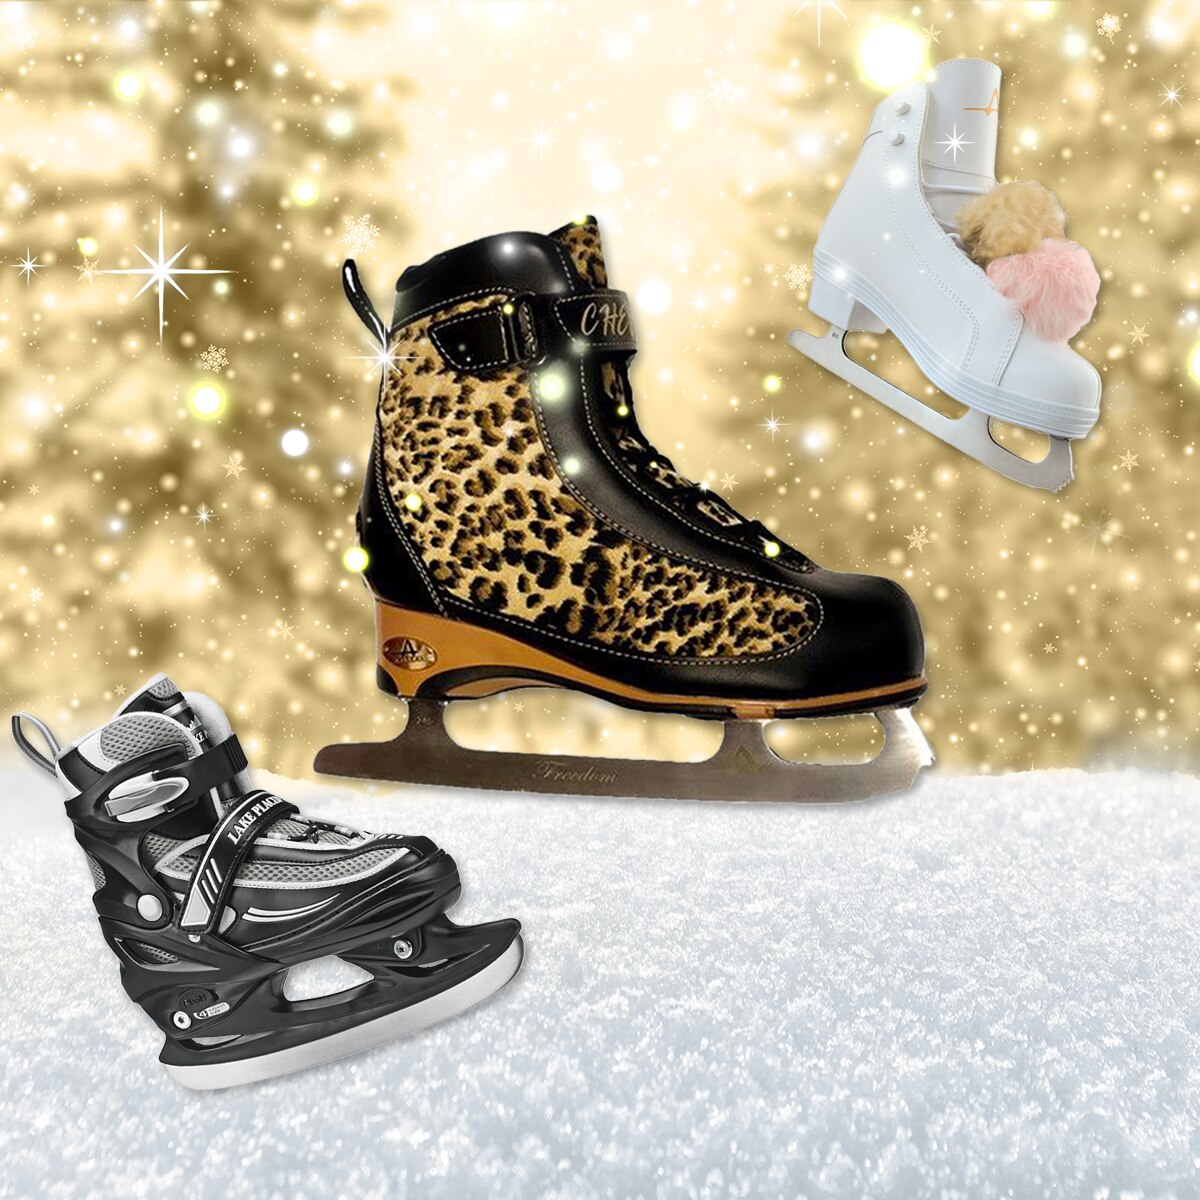 Move Over Roller Blades Ice Skates Are 2020s Must-Have Holiday Gift